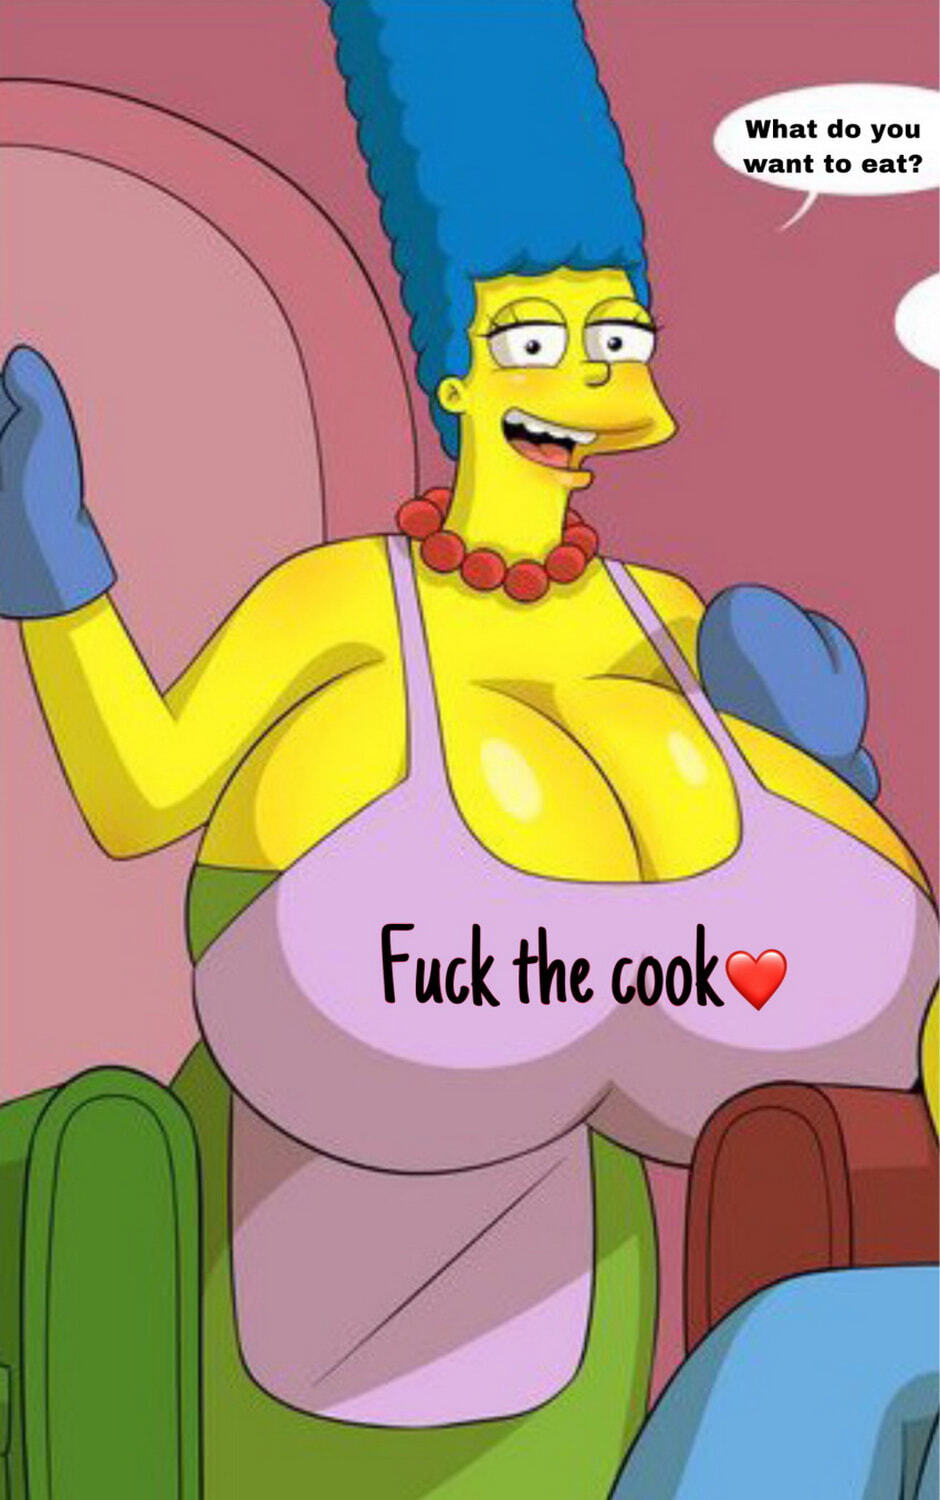 Big Tit Simpsons Porn - Marge Simpson Milf Giant Breasts Big Breast Solo > Your Cartoon Porn